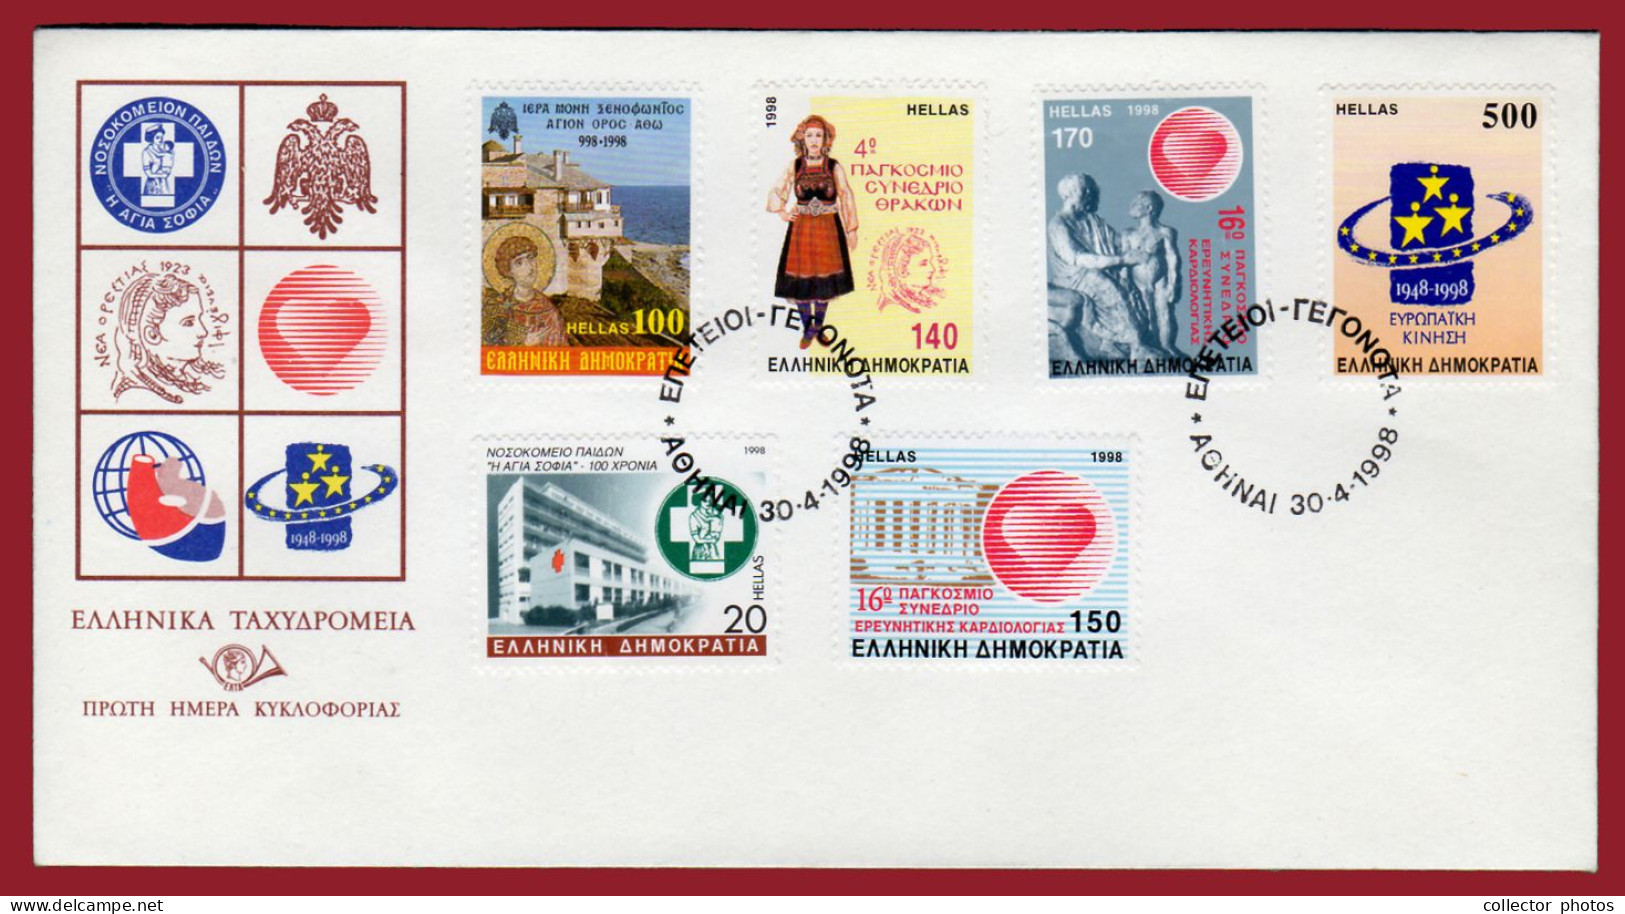 Greece. Lot of 12 First Day Covers FDC [de093]